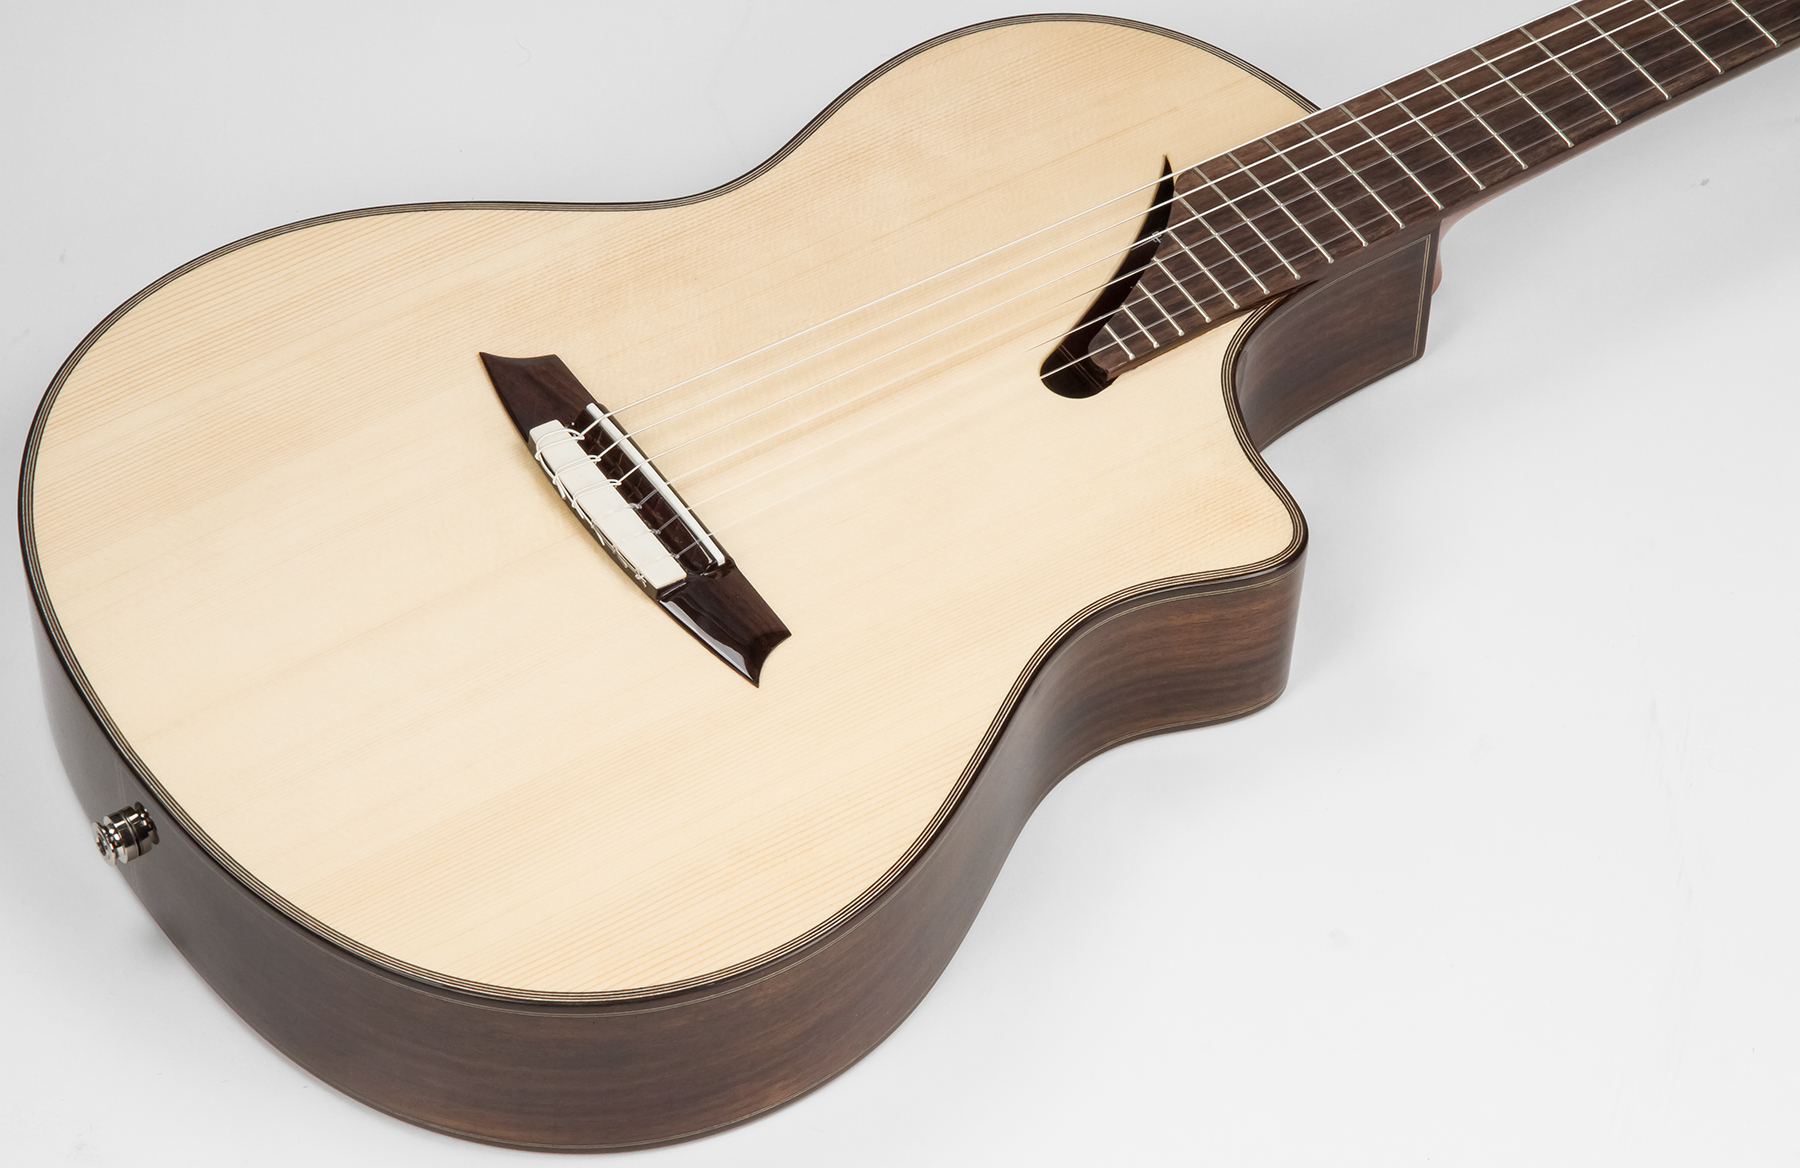 Martinez Ms14r Performer Cedre Palissandre Rw +housse - Natural - Classical guitar 4/4 size - Variation 1